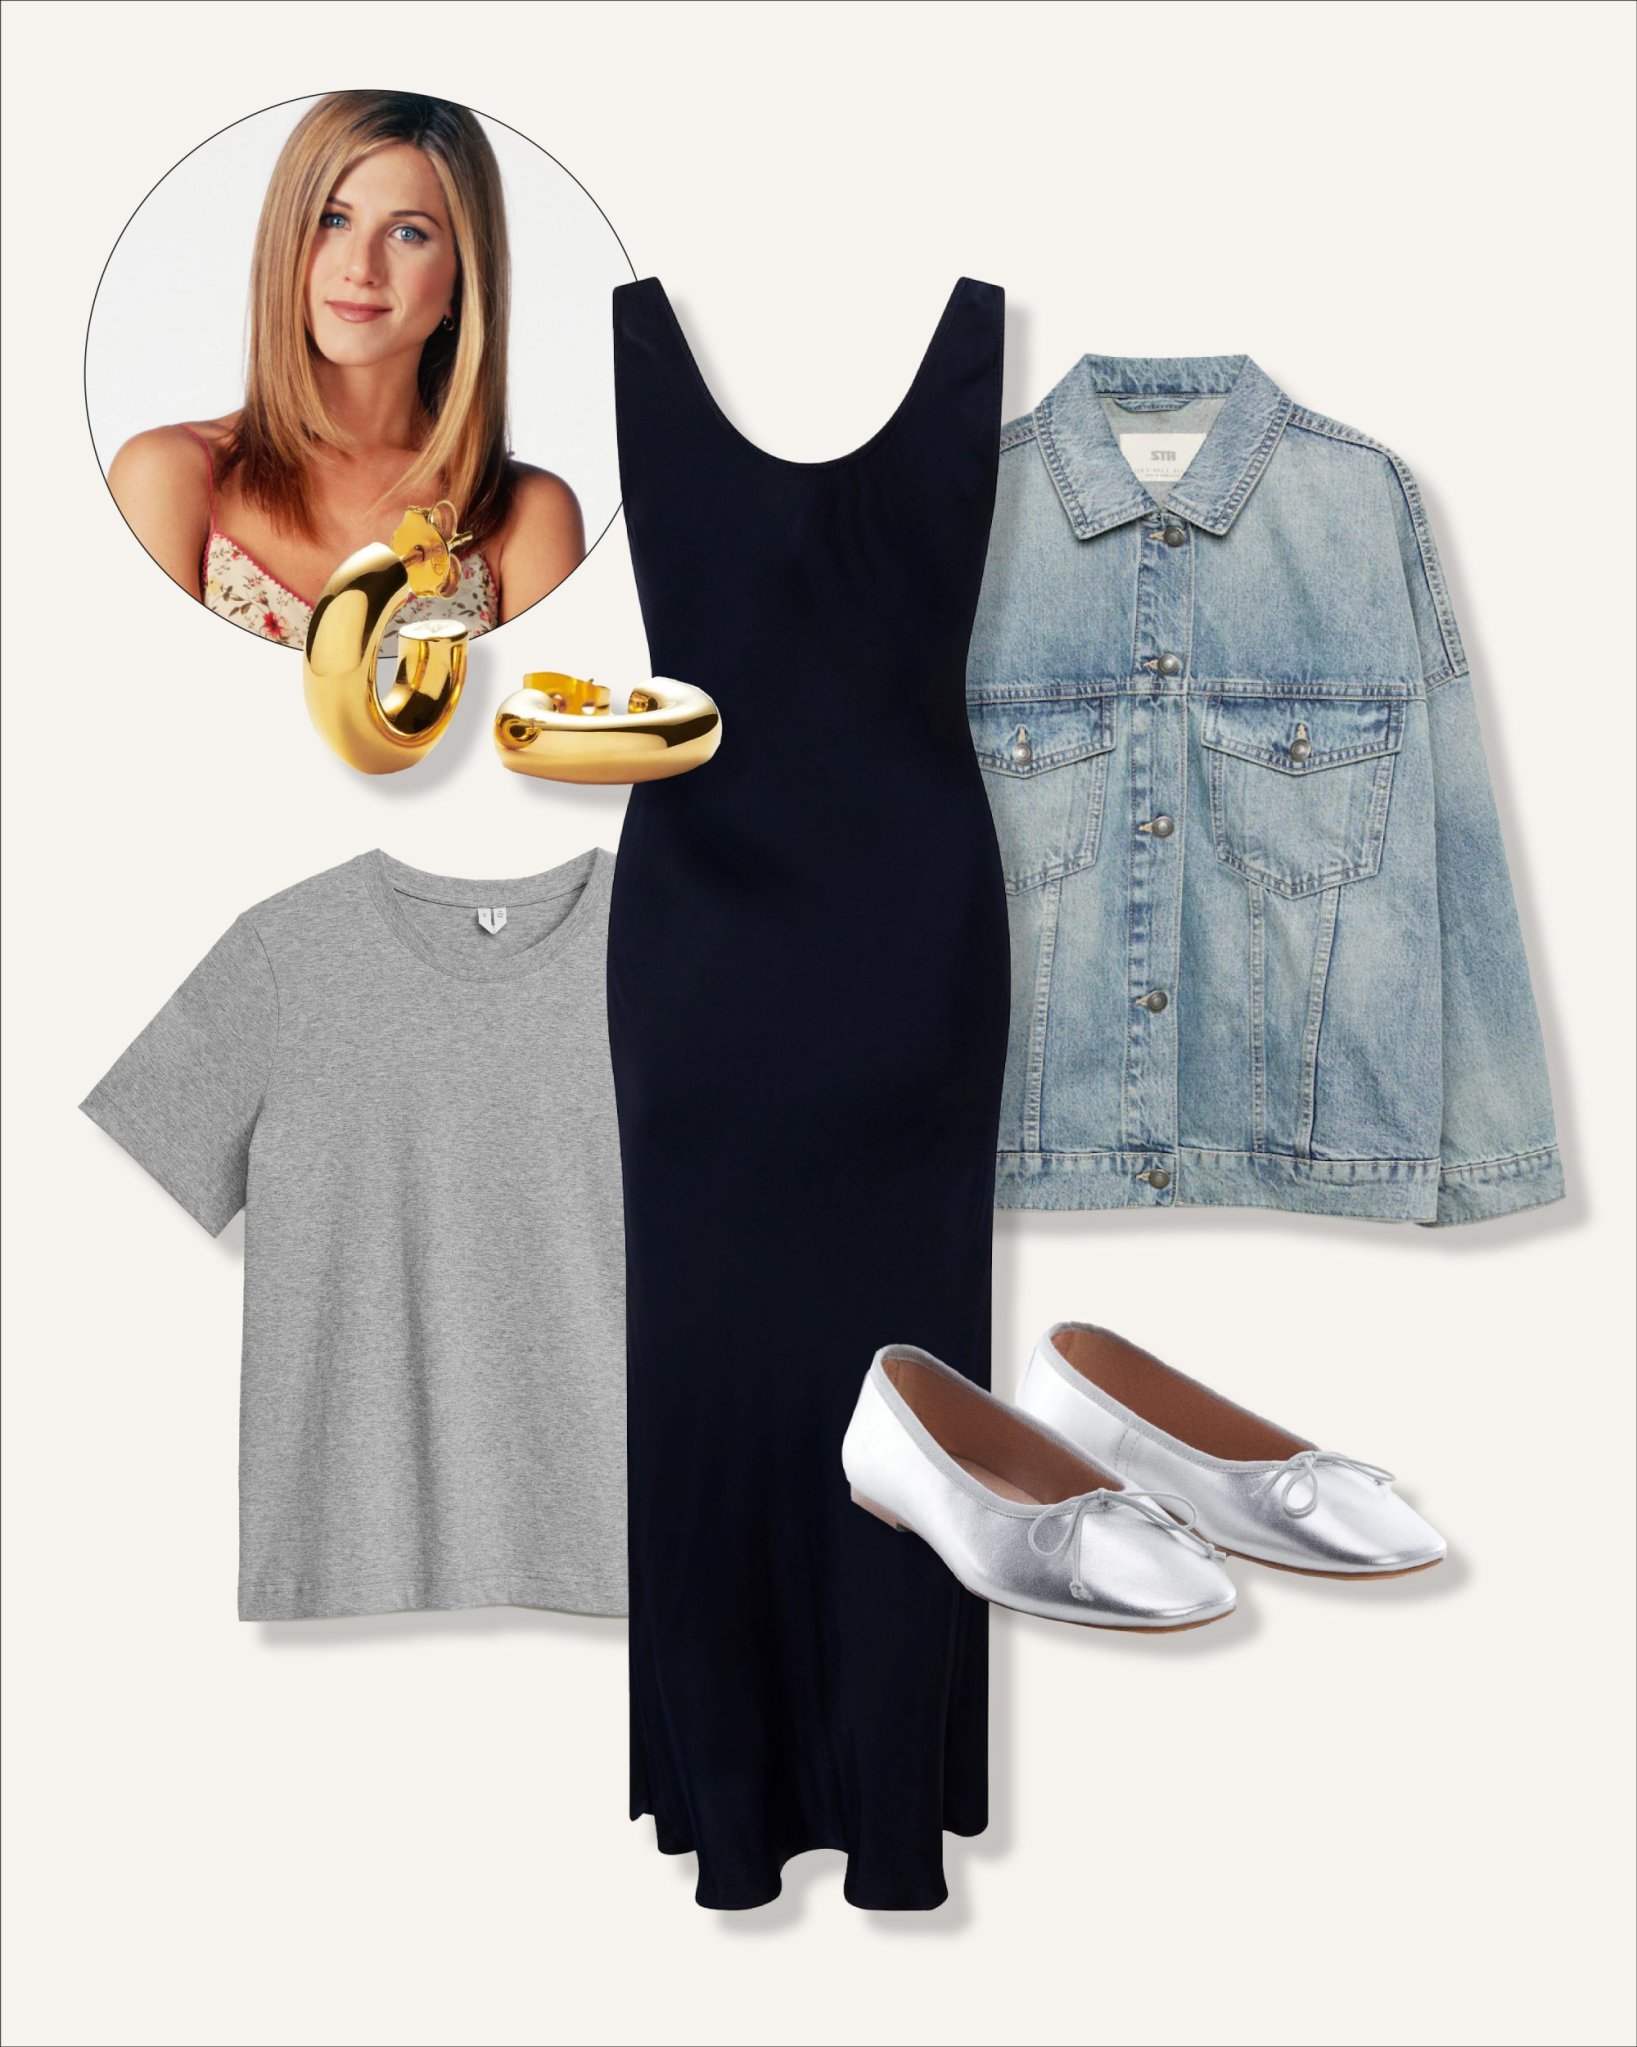 Rachel Green From Friends  Movie inspired outfits, 90's outfits